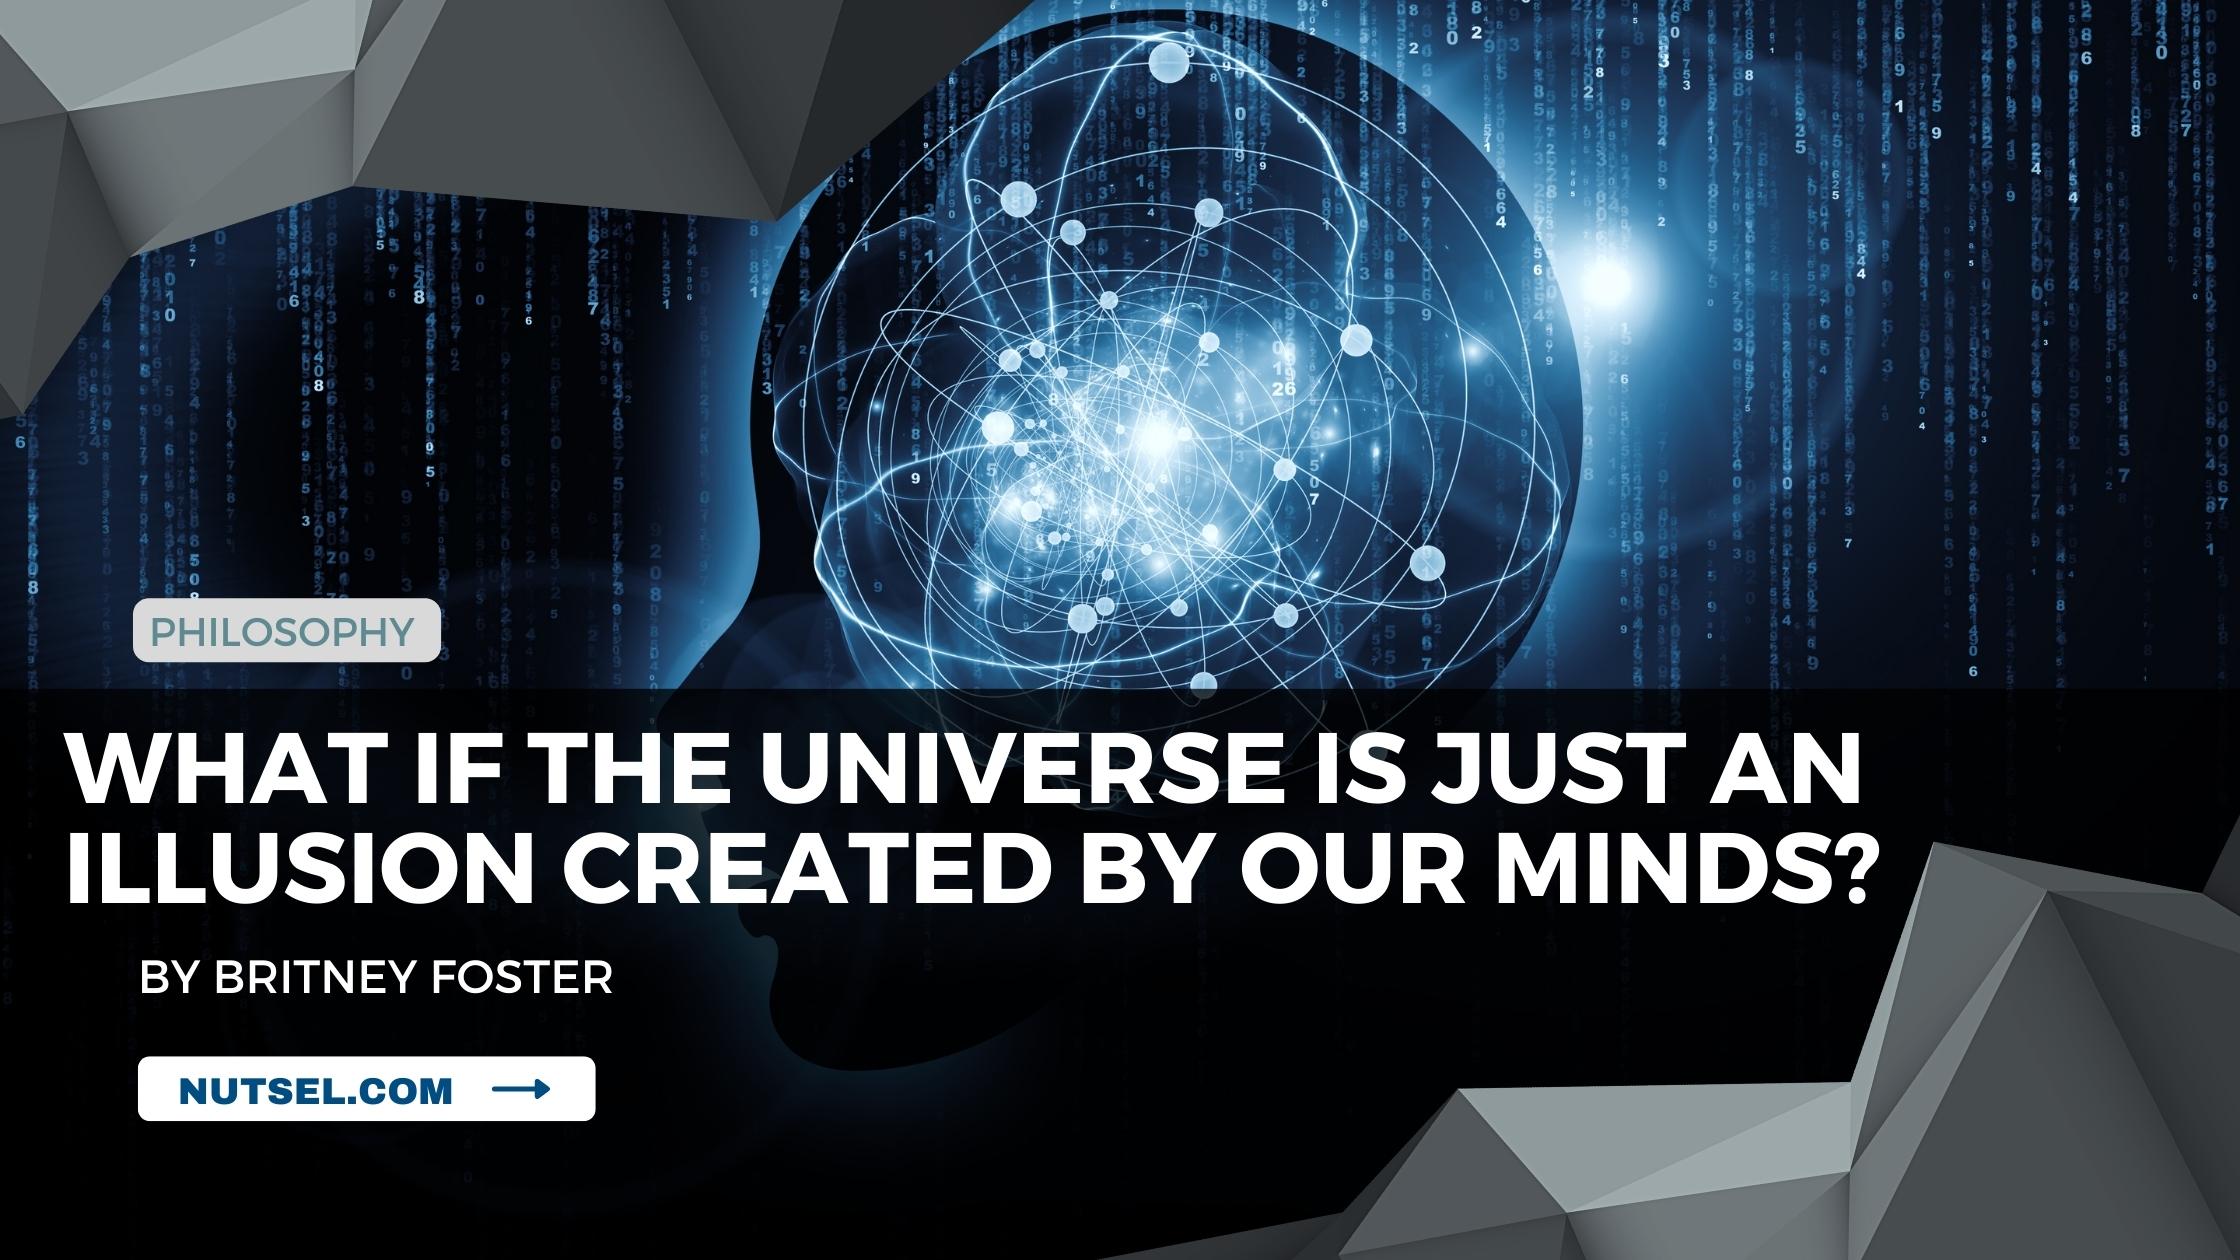 What if the universe is just an illusion created by our minds?